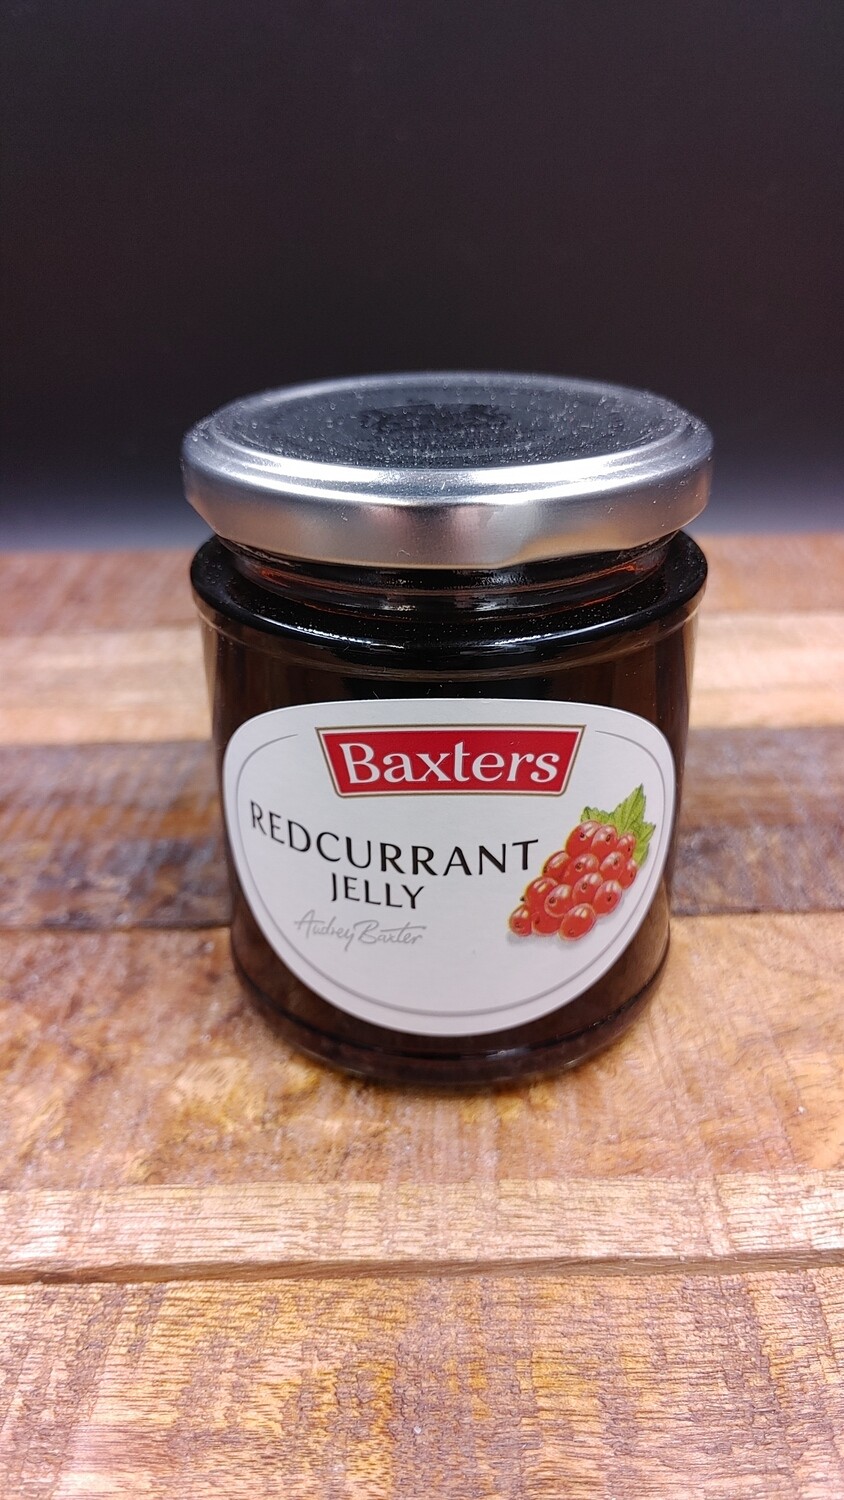 Baxters Redcurrant Jelly 210g